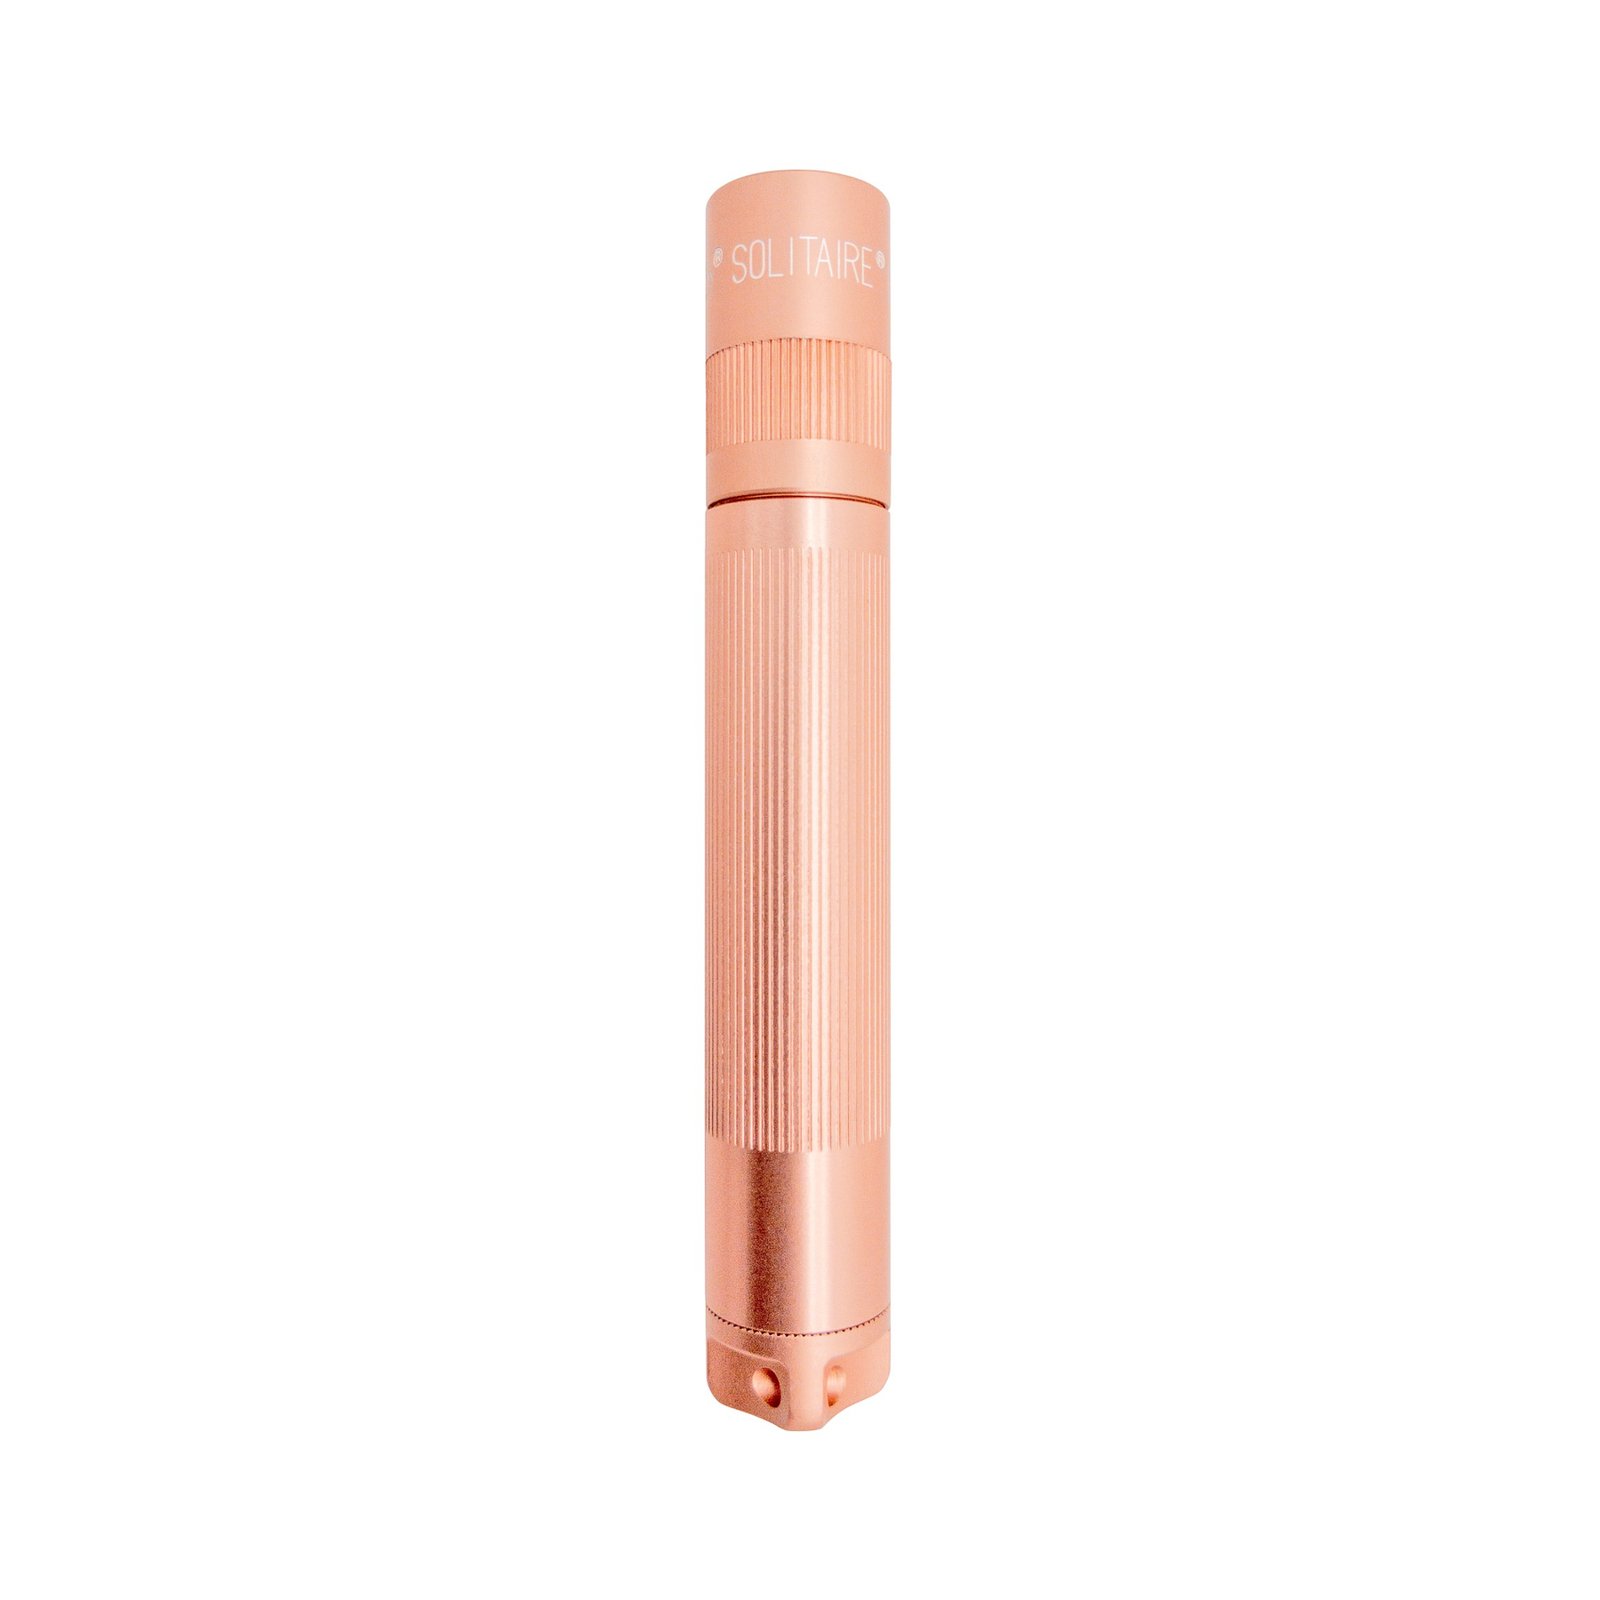 Maglite LED-ficklampa Solitaire, 1-cell AAA, rosé